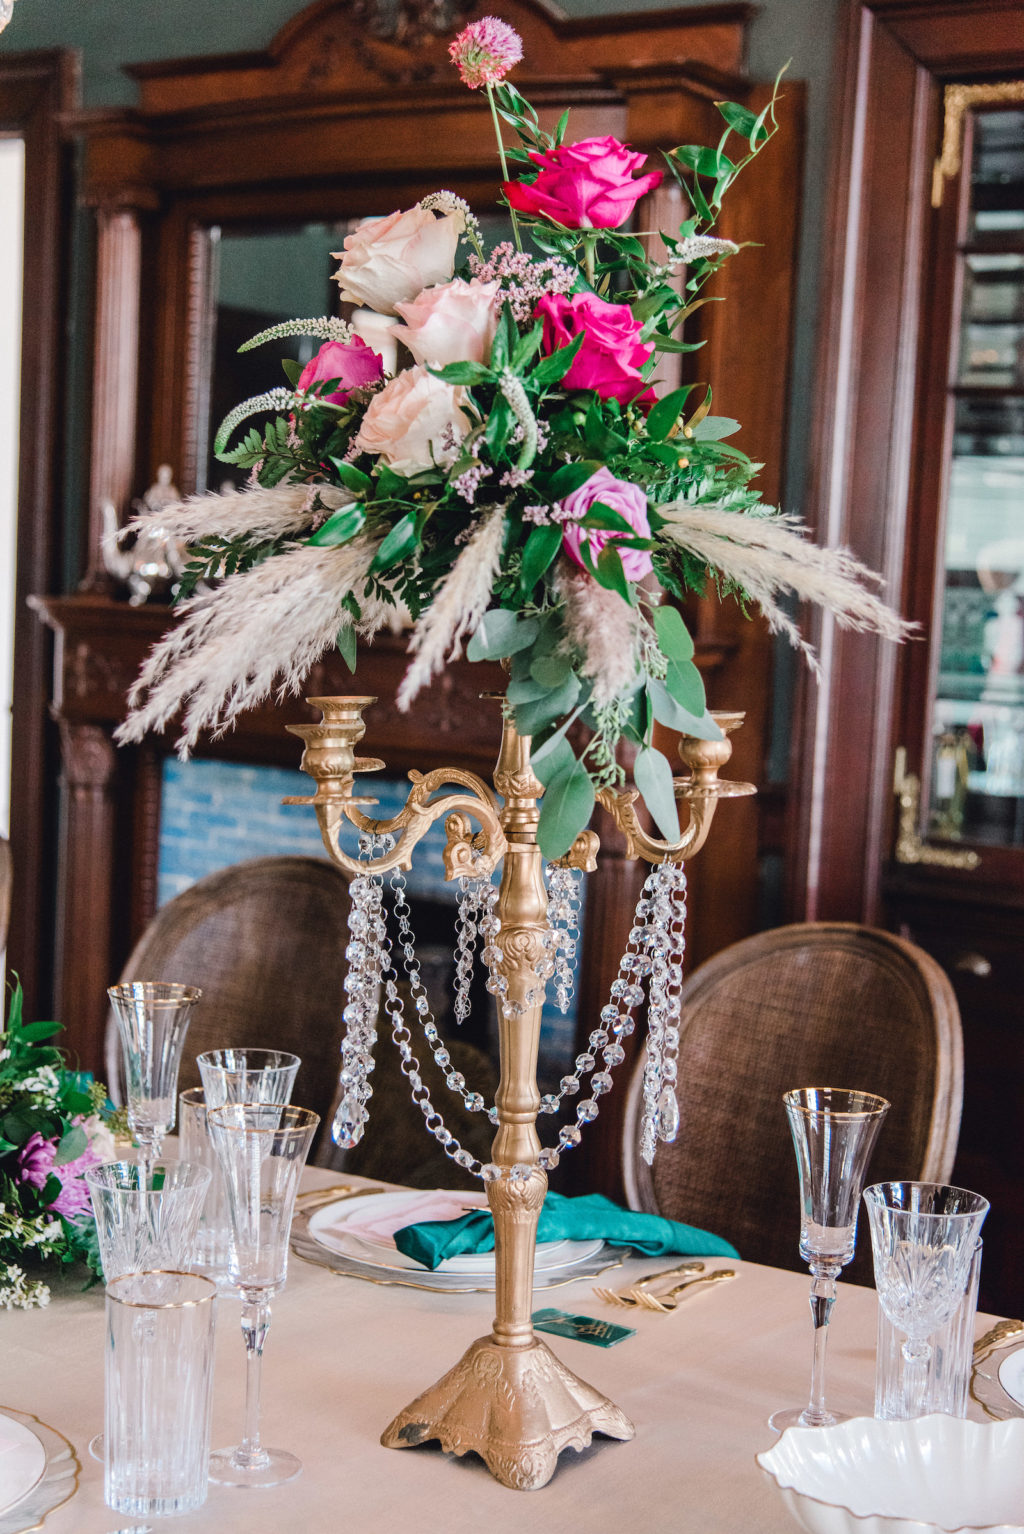 Gold Candelabra with Crystals Hanging, Jewel Toned Blush Pnk, Fuschia, Purple Roses, Greenery and Feathers Flower Centerpiece | Tampa Bay Wedding Planner EventFull Weddings | Kate Ryan Event Rentals